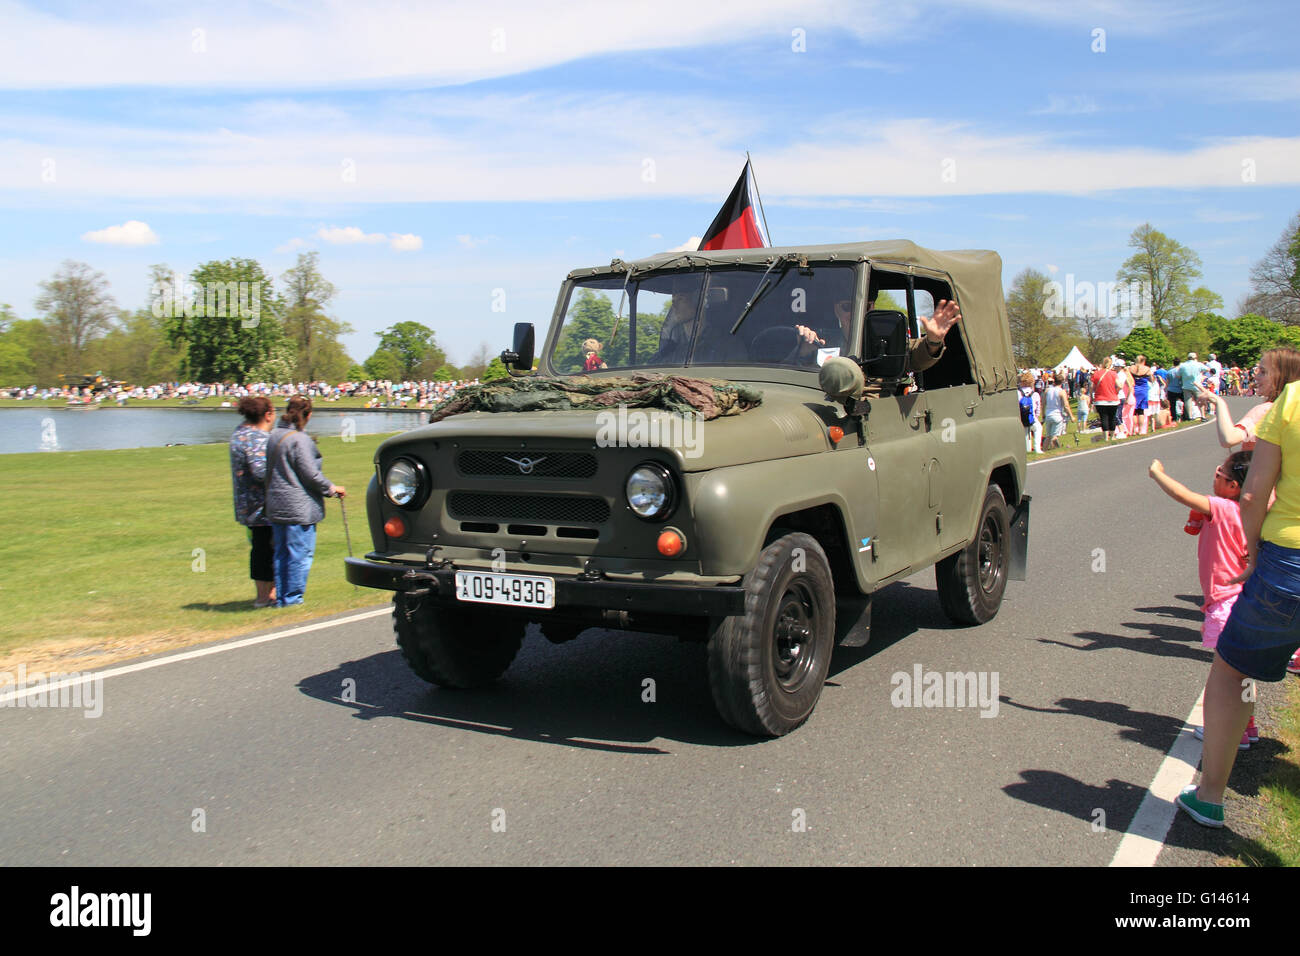 Russian-built East German Army UAZ 469B General Purpose 4x4. Chestnut Sunday, 8th May 2016. Bushy Park, Hampton Court, London Borough of Richmond, England, Great Britain, United Kingdom, UK, Europe. Vintage and classic vehicle parade and displays with fairground attractions and military reenactments. Credit:  Ian Bottle / Alamy Live News Stock Photo